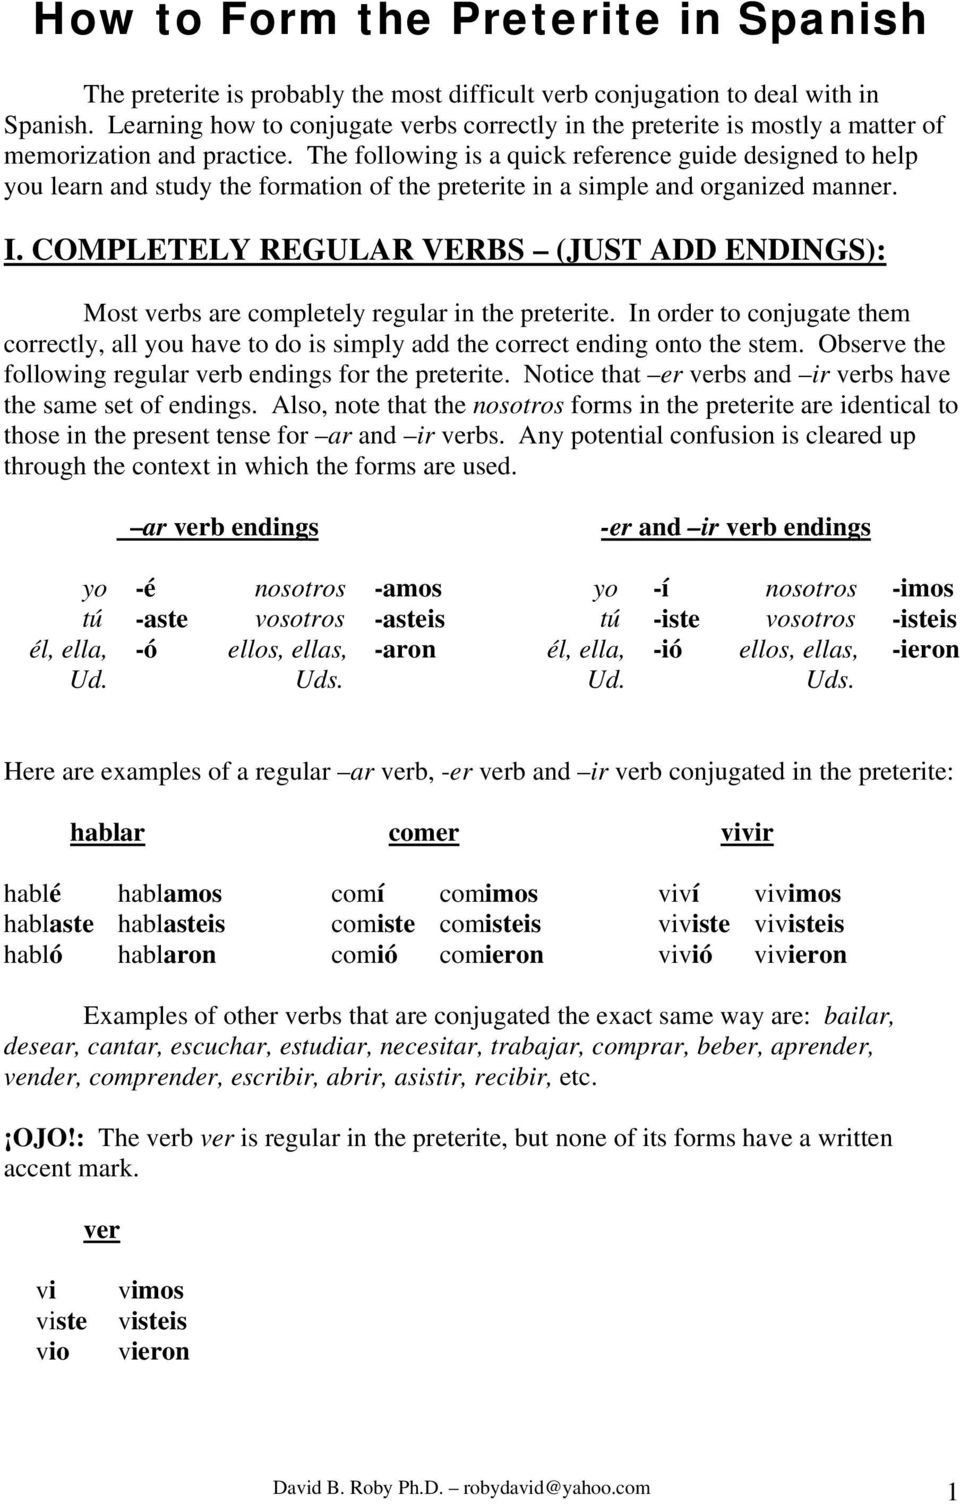 The following is a quick reference guide designed to help you learn and study the formation of the preterite in a simple and organized manner. I.